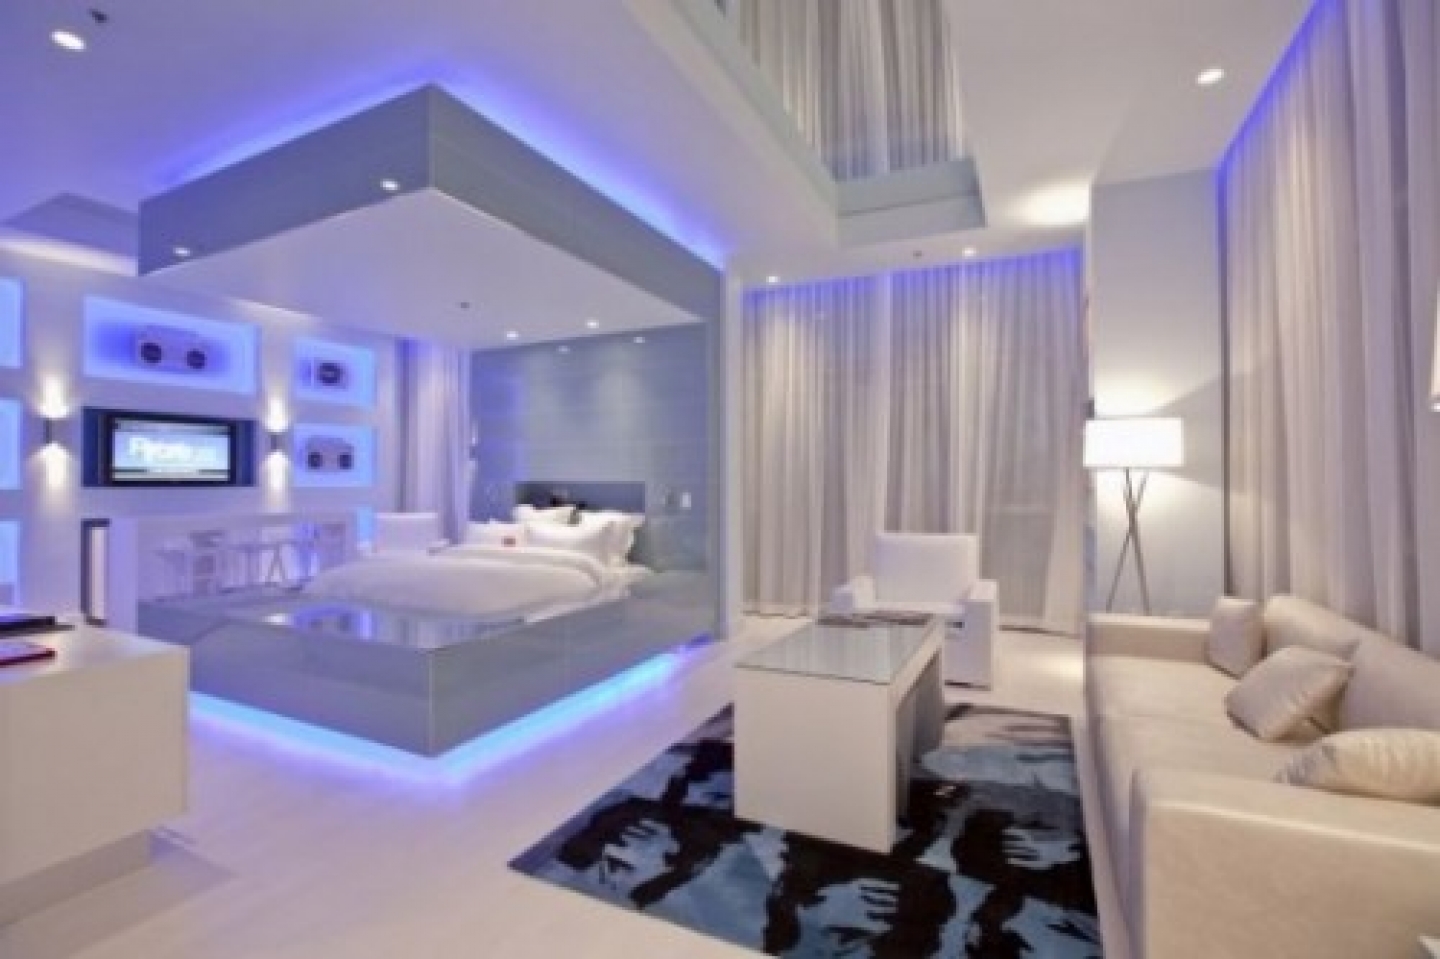 bedroom designs modern cool bed bedrooms wow rooms idea decor awesome contemporary most decorating unique beds architecture apartment really latest